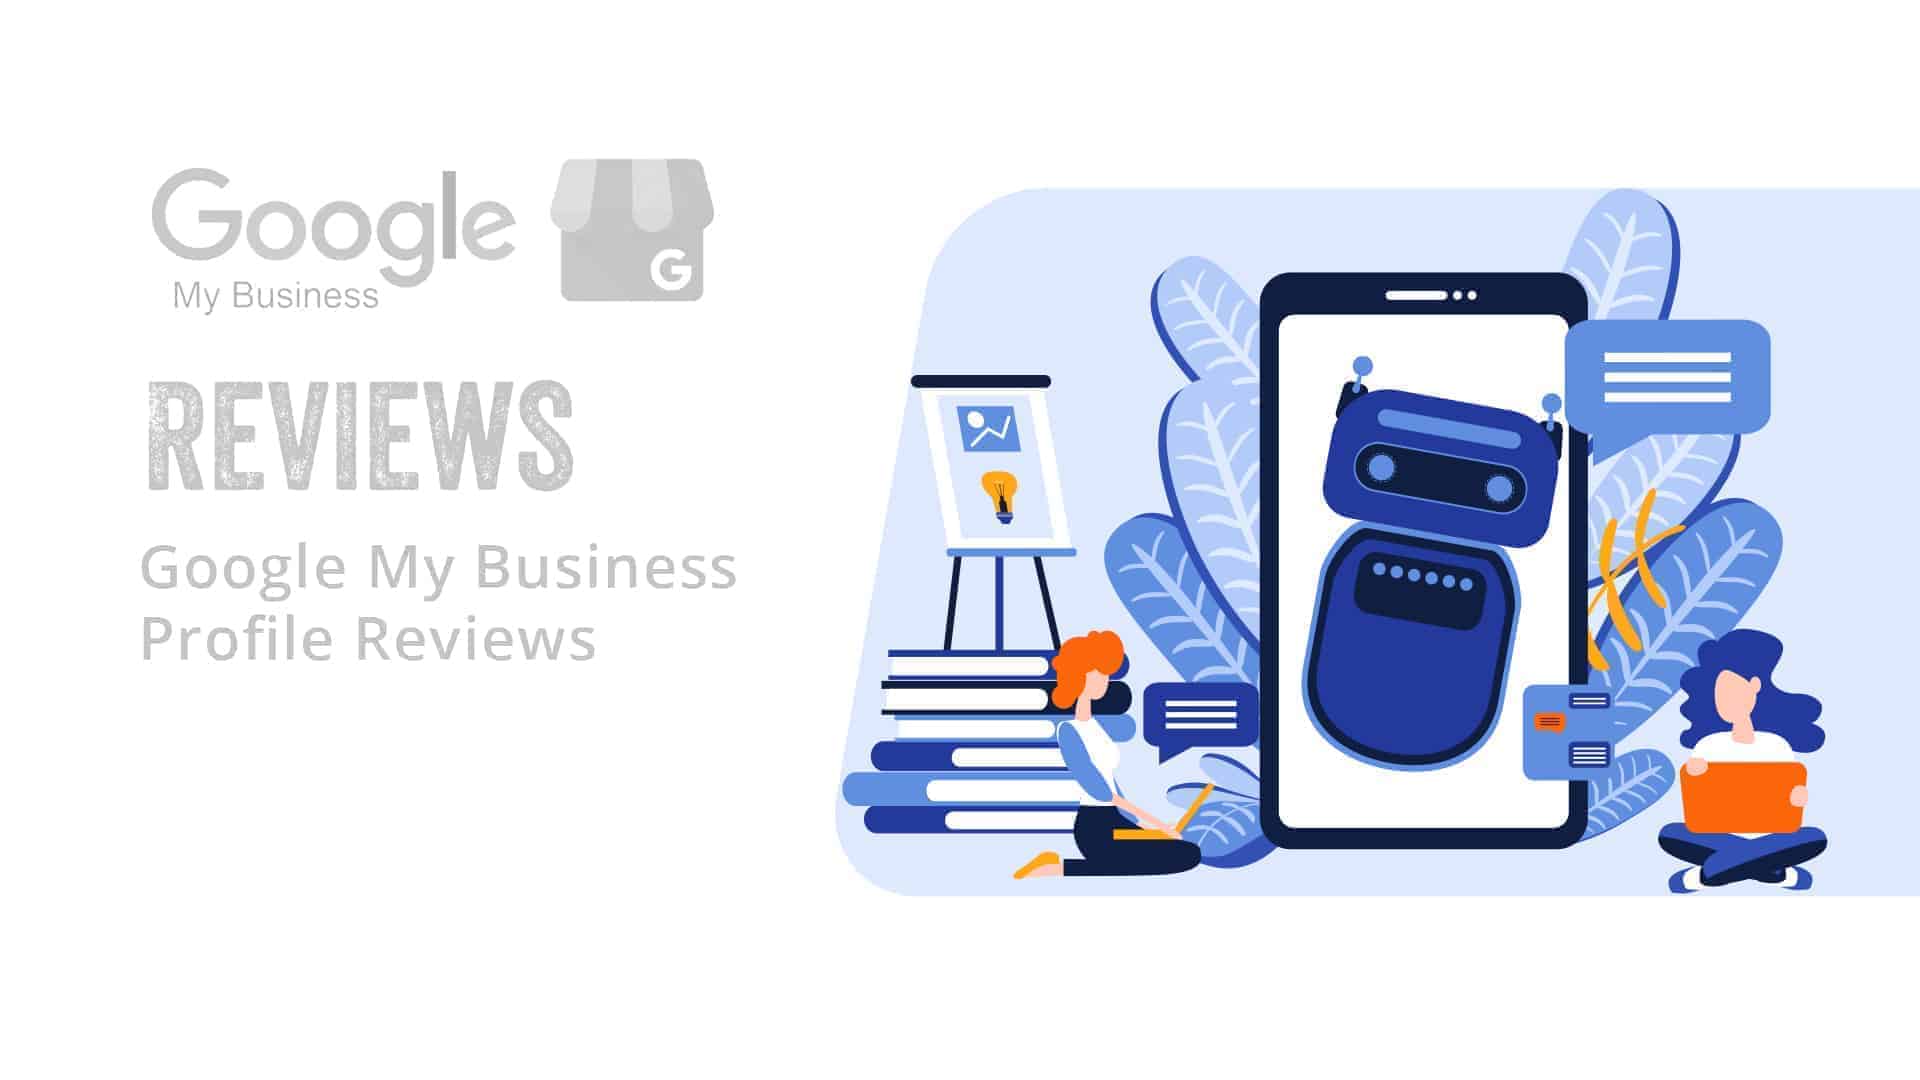 Creating a System for Google My Business Reviews